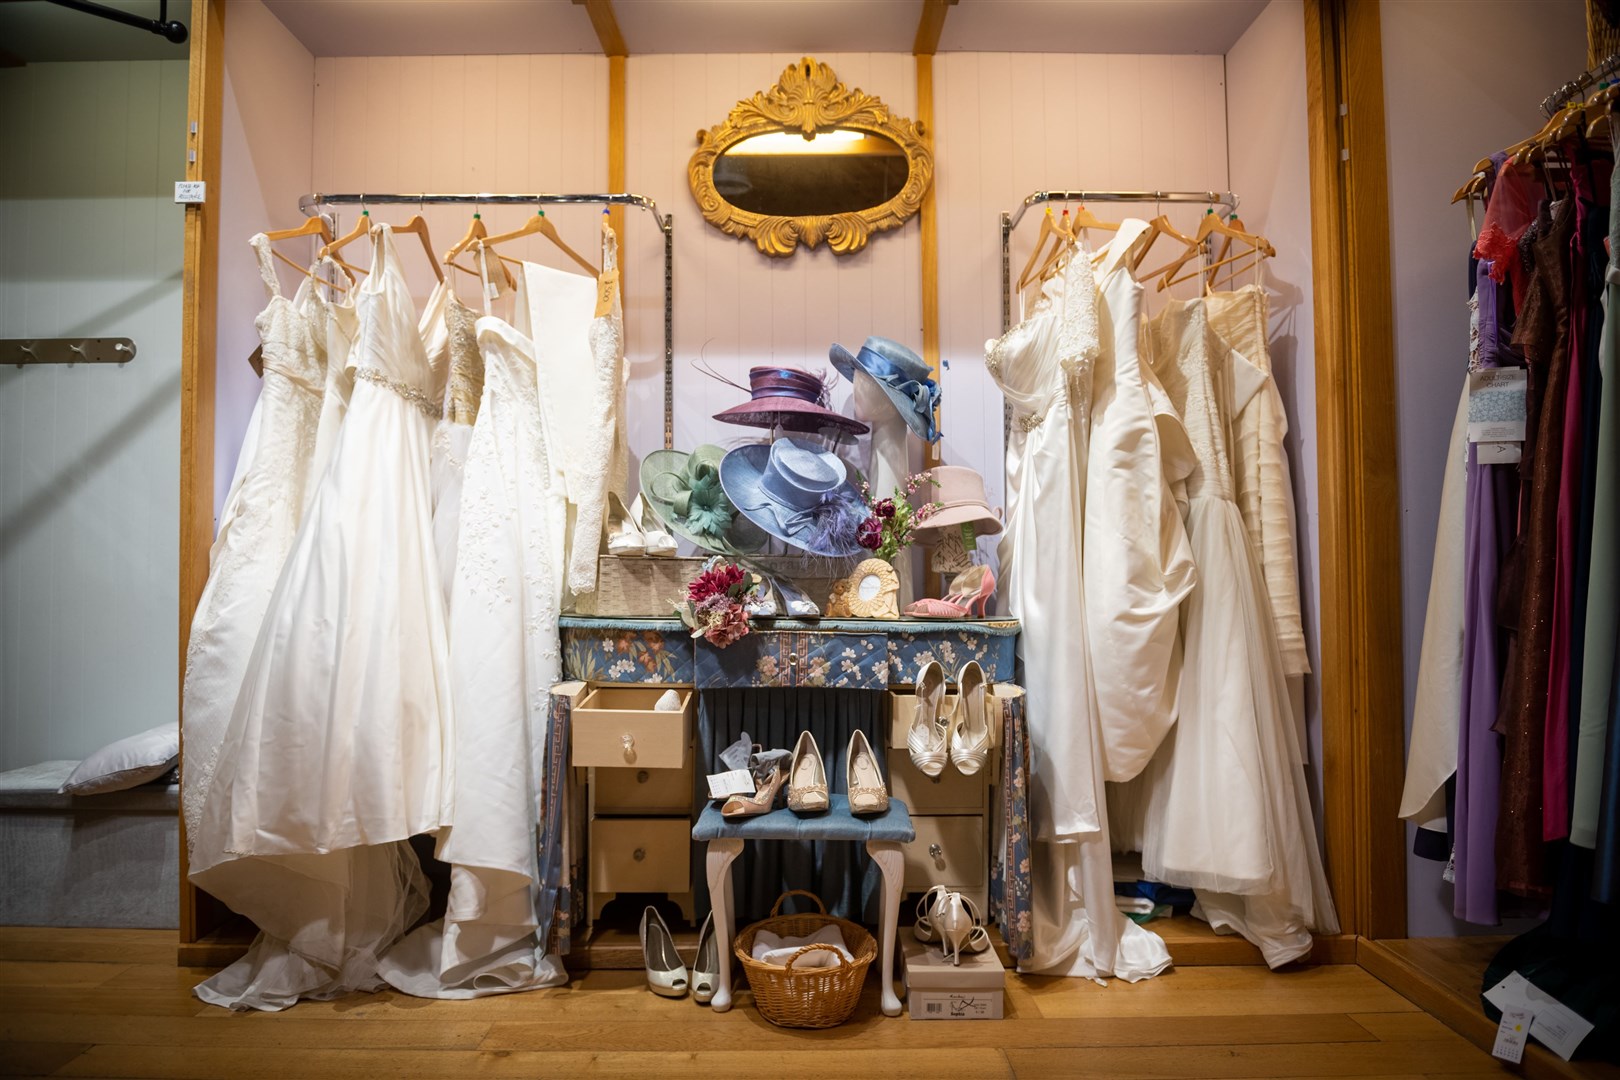 The wedding dresses are in all styles from vintage to contemporary. Picture: Callum Mackay.